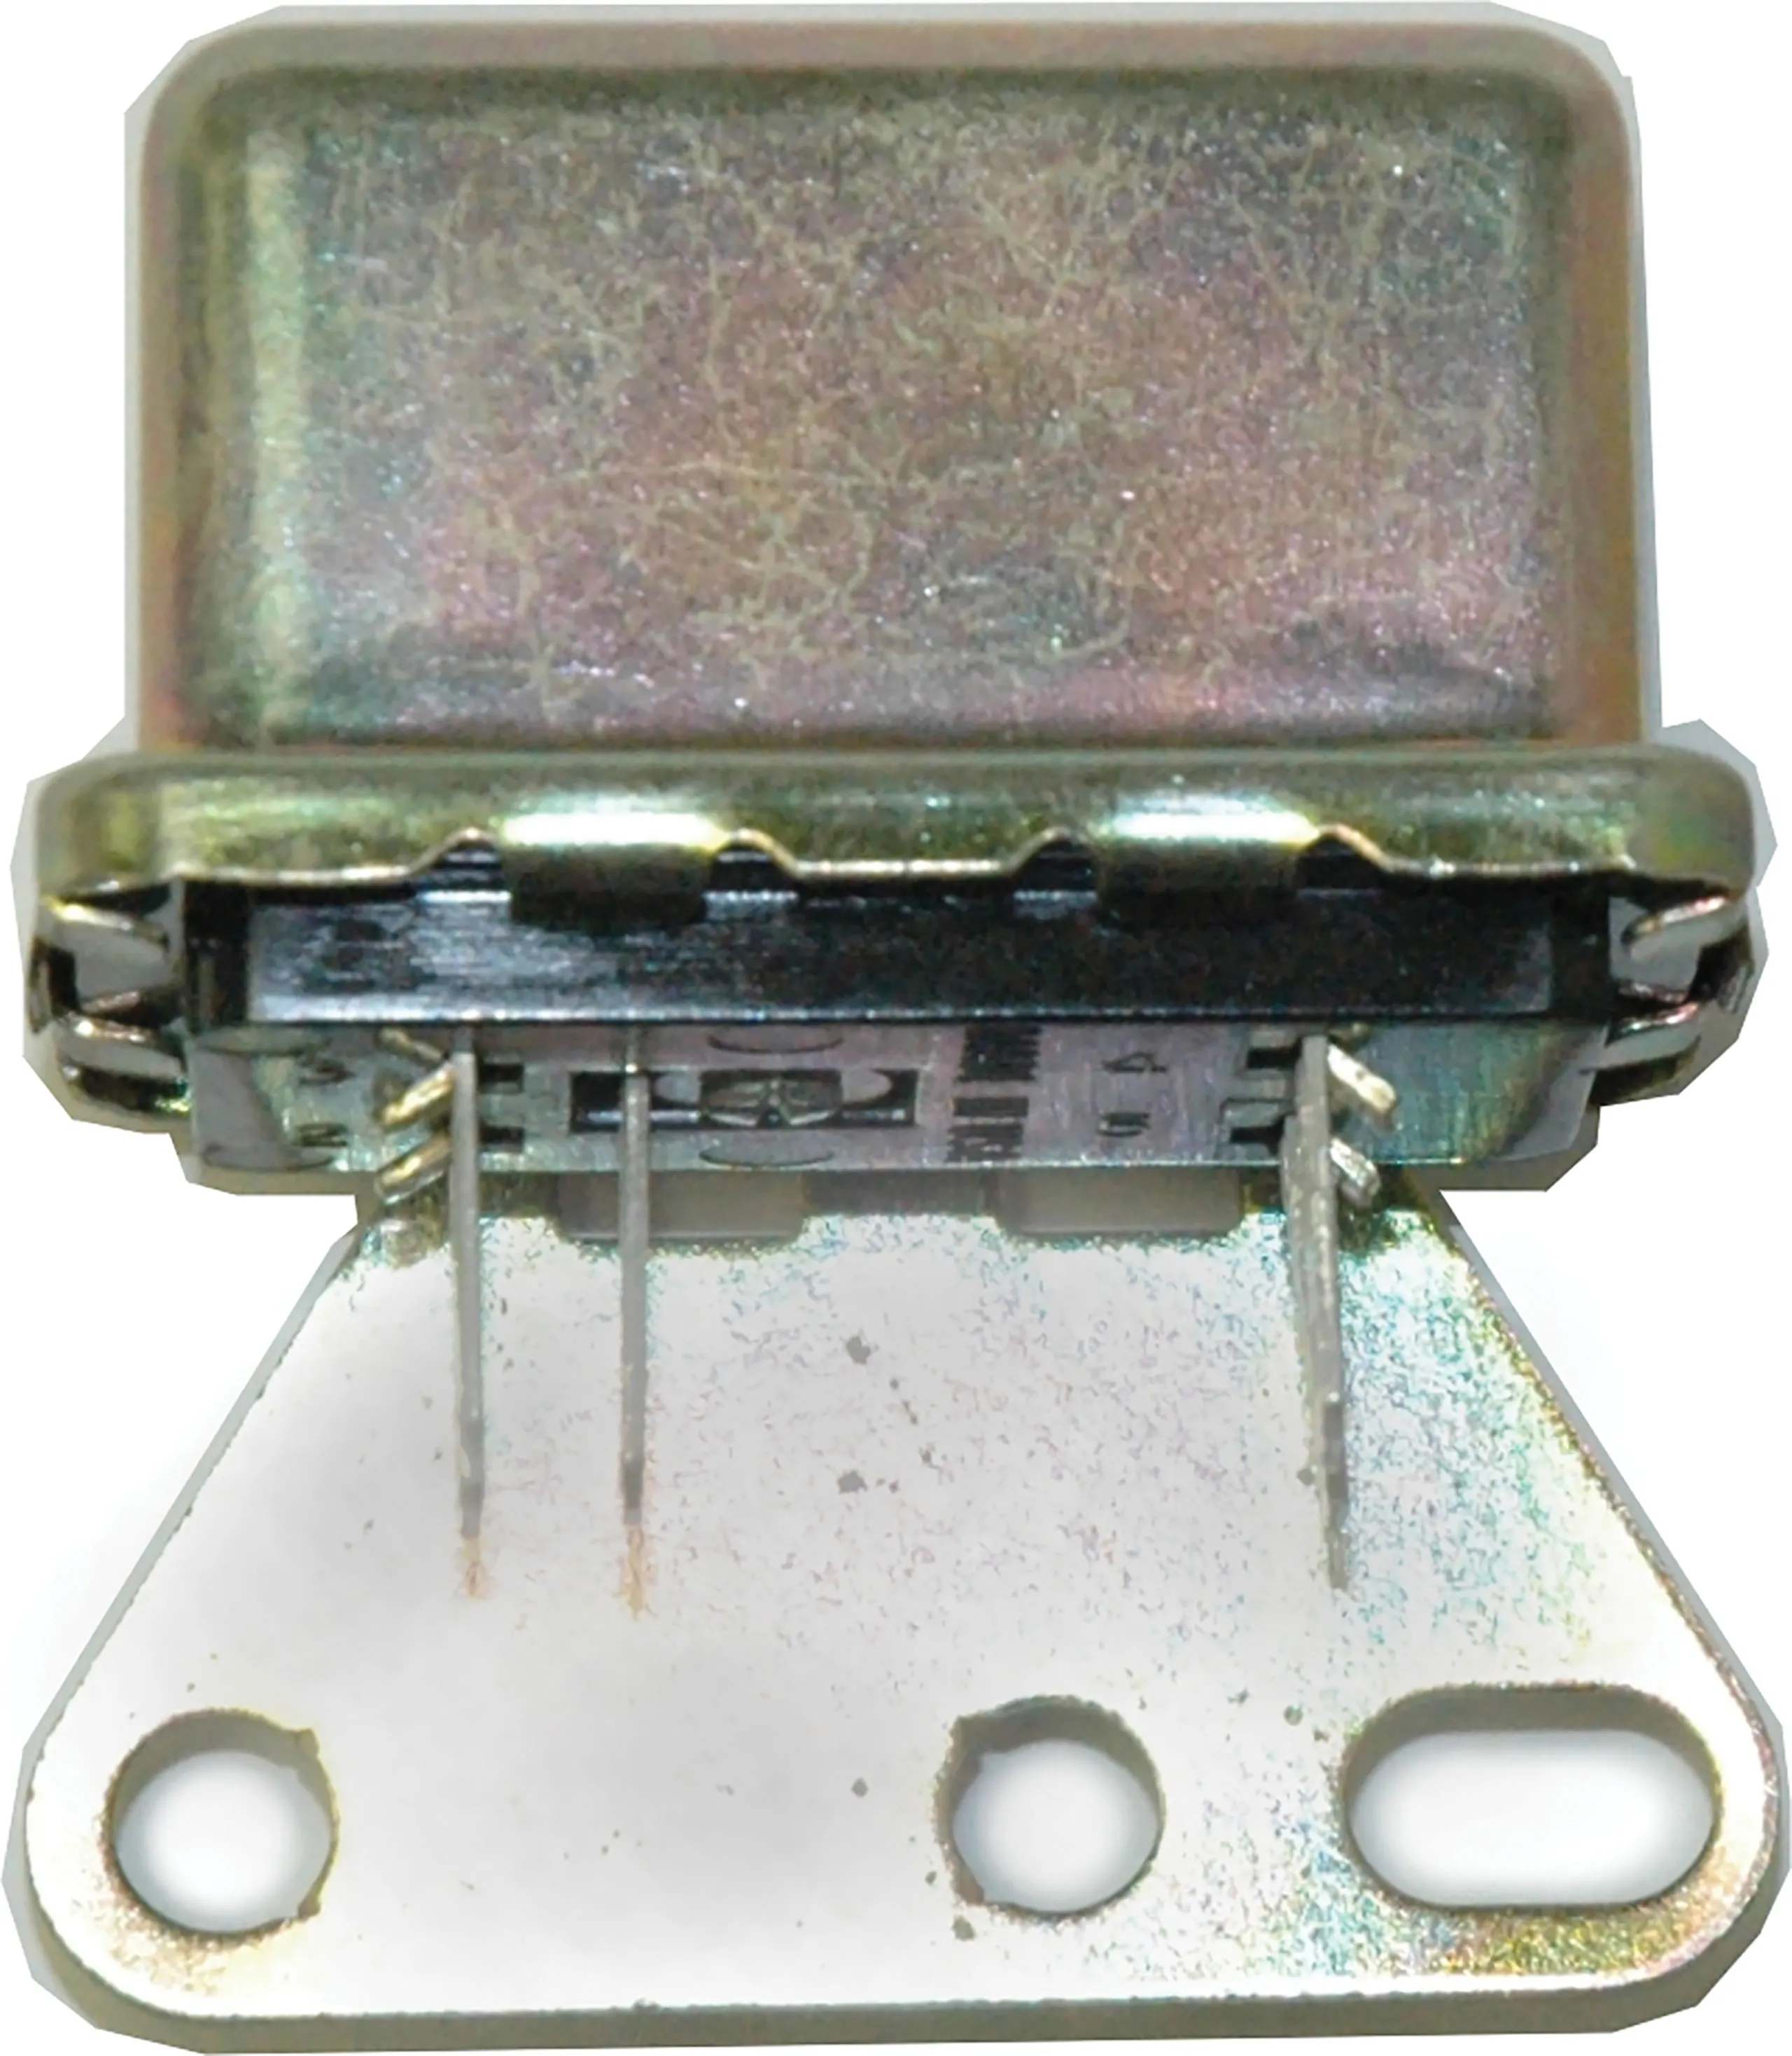 C3 1968-1972 Chevrolet Corvette 1968-1972 Windshield Wiper Relay, 1977-1979 AC Relay - Lectric Limited, Inc.